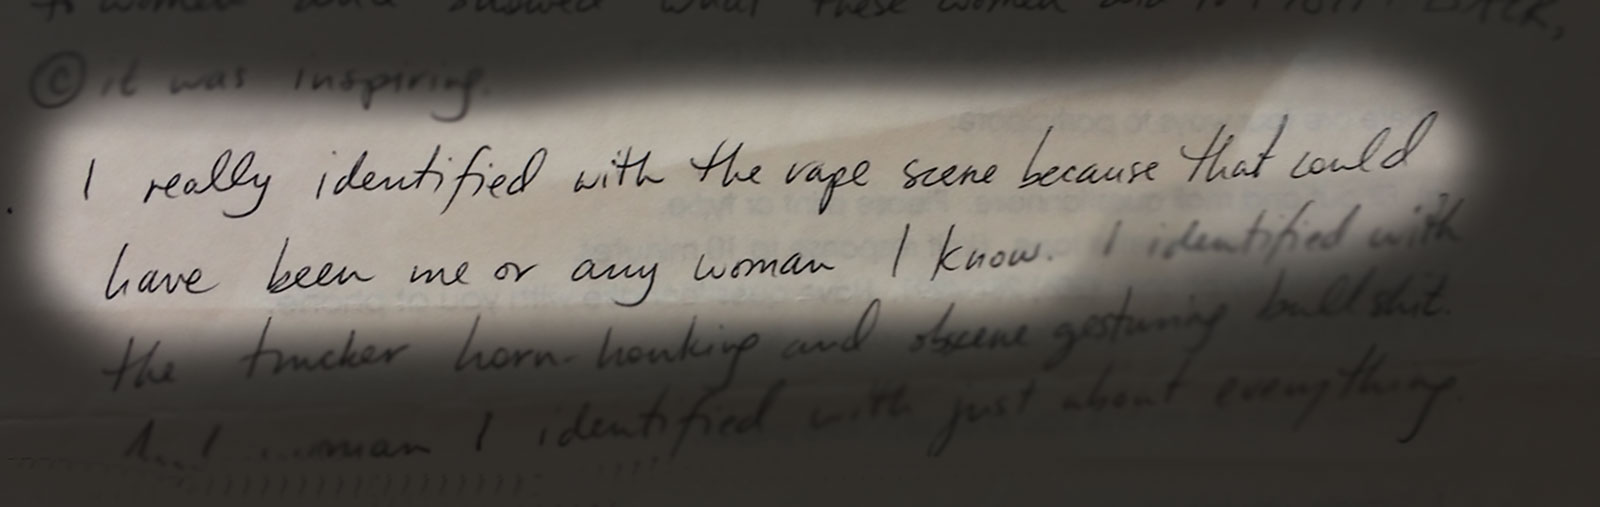 Quote from questionnaire: I really identified with the rape scene because that could have been me or any woman I know.